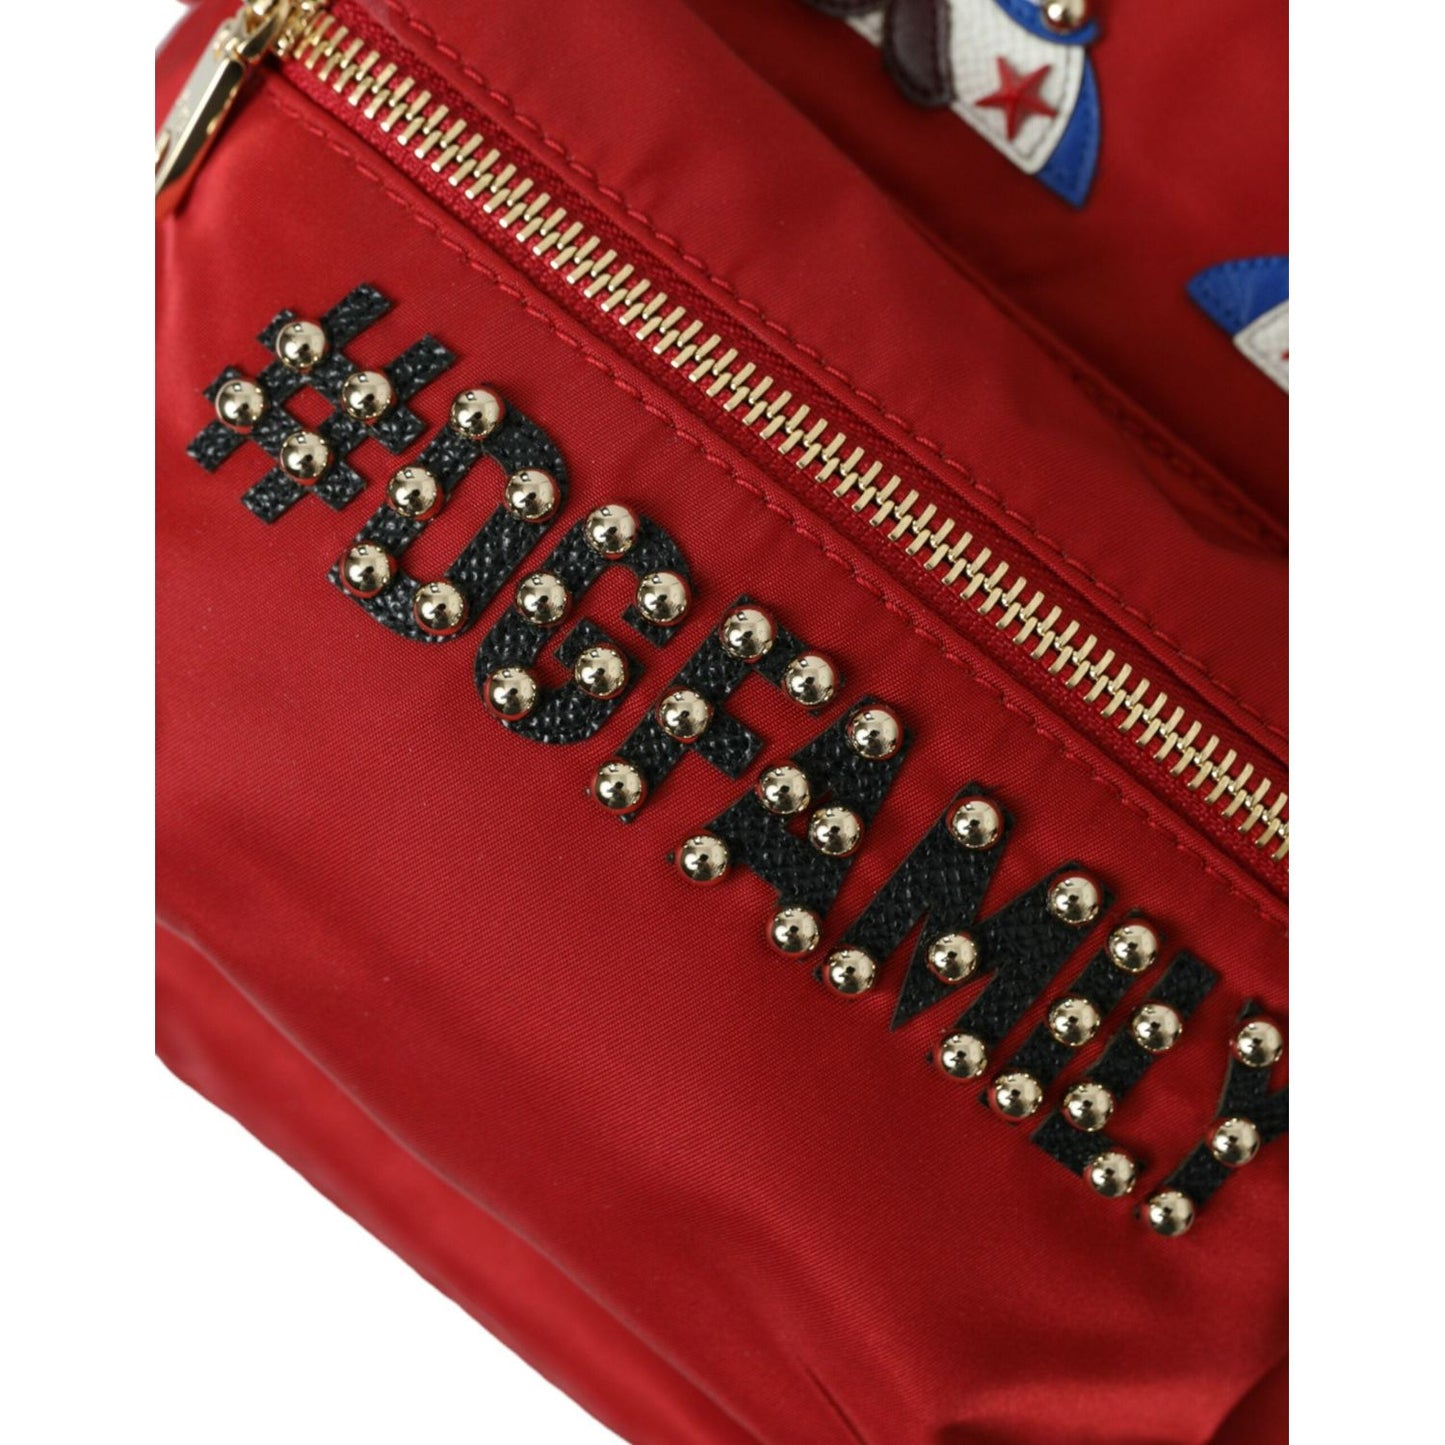 Dolce & Gabbana Embellished Red Backpack with Gold Detailing embellished-red-backpack-with-gold-detailing